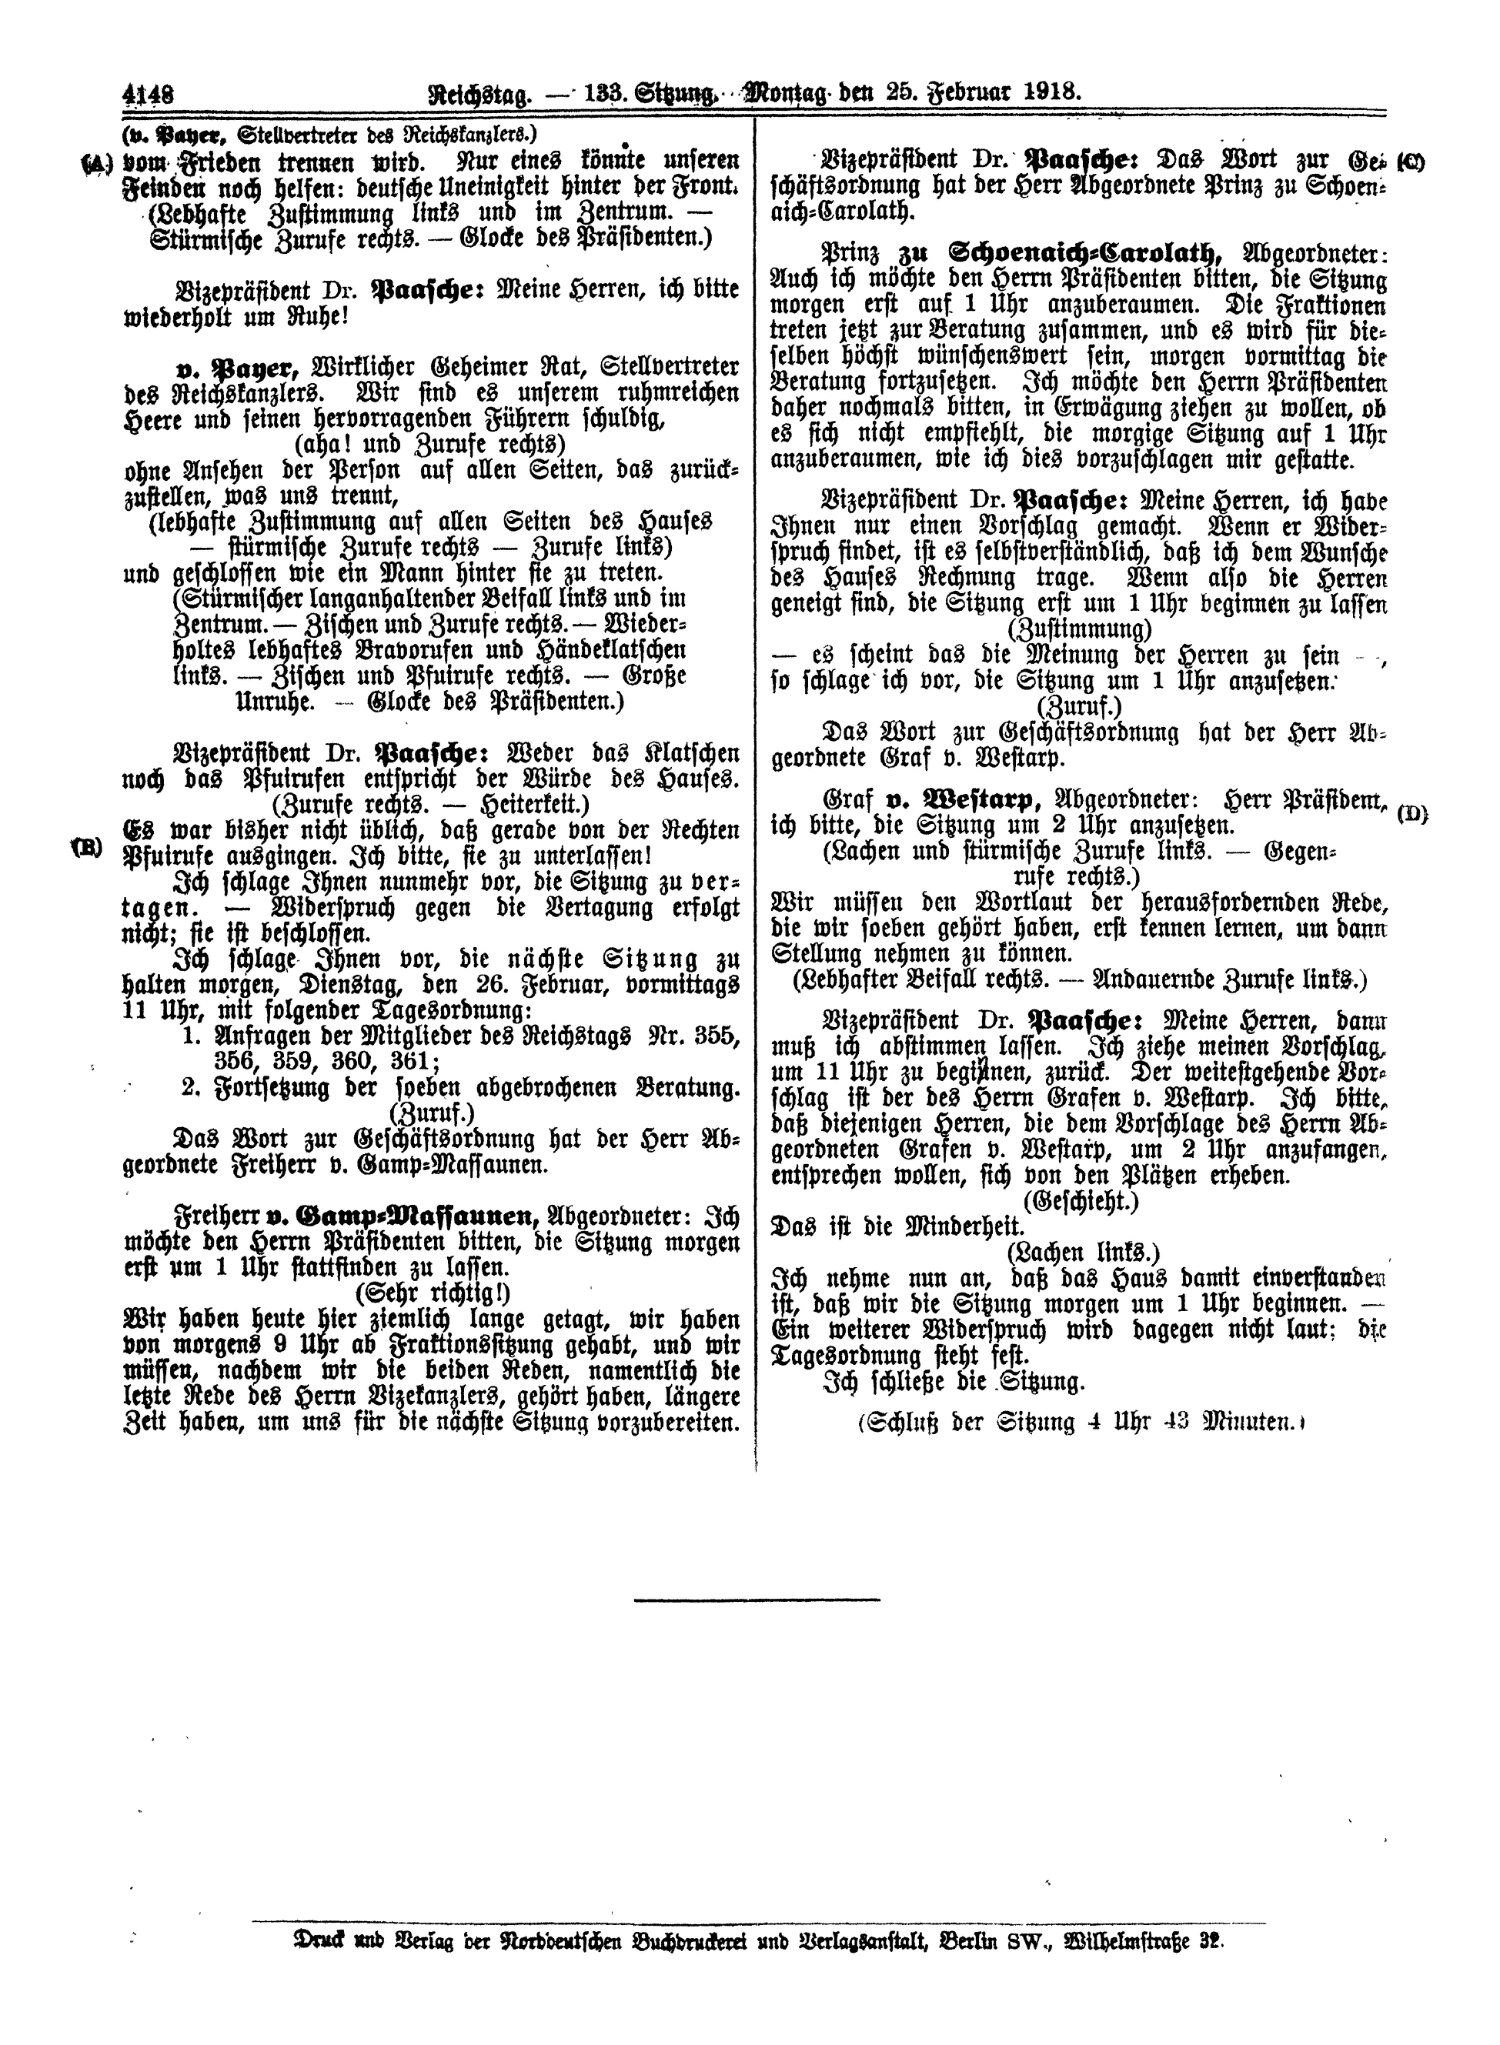 Scan of page 4148